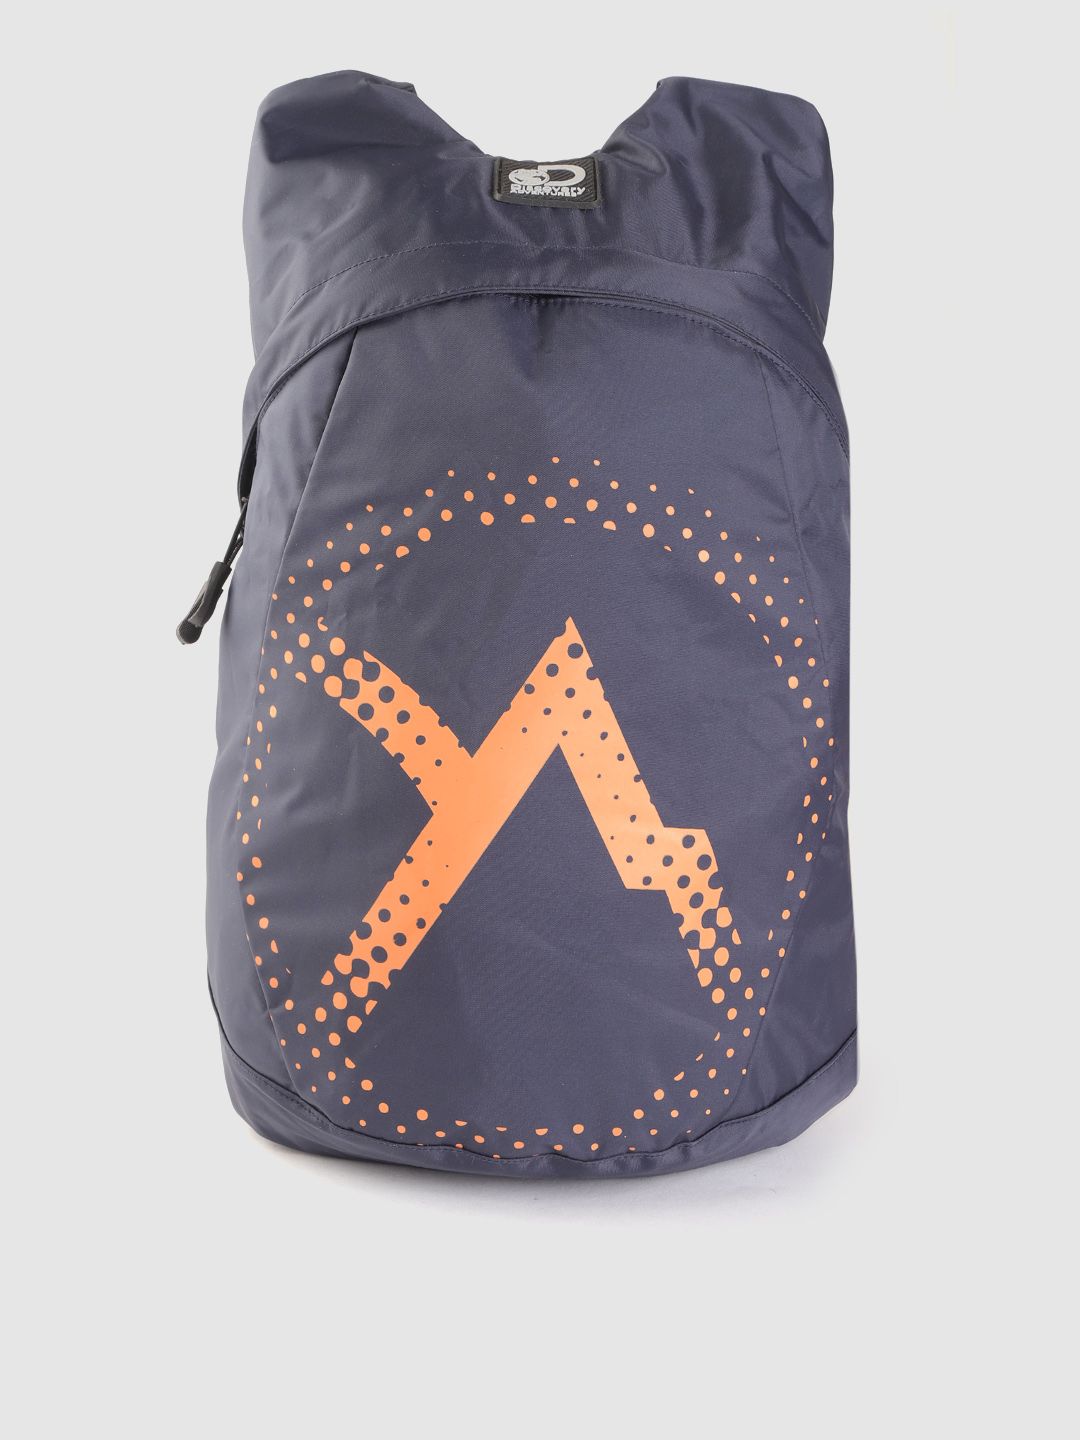 The Roadster Lifestyle Co x Discovery Unisex Navy Blue & Orange Geometric Print Foldable Backpack Price in India